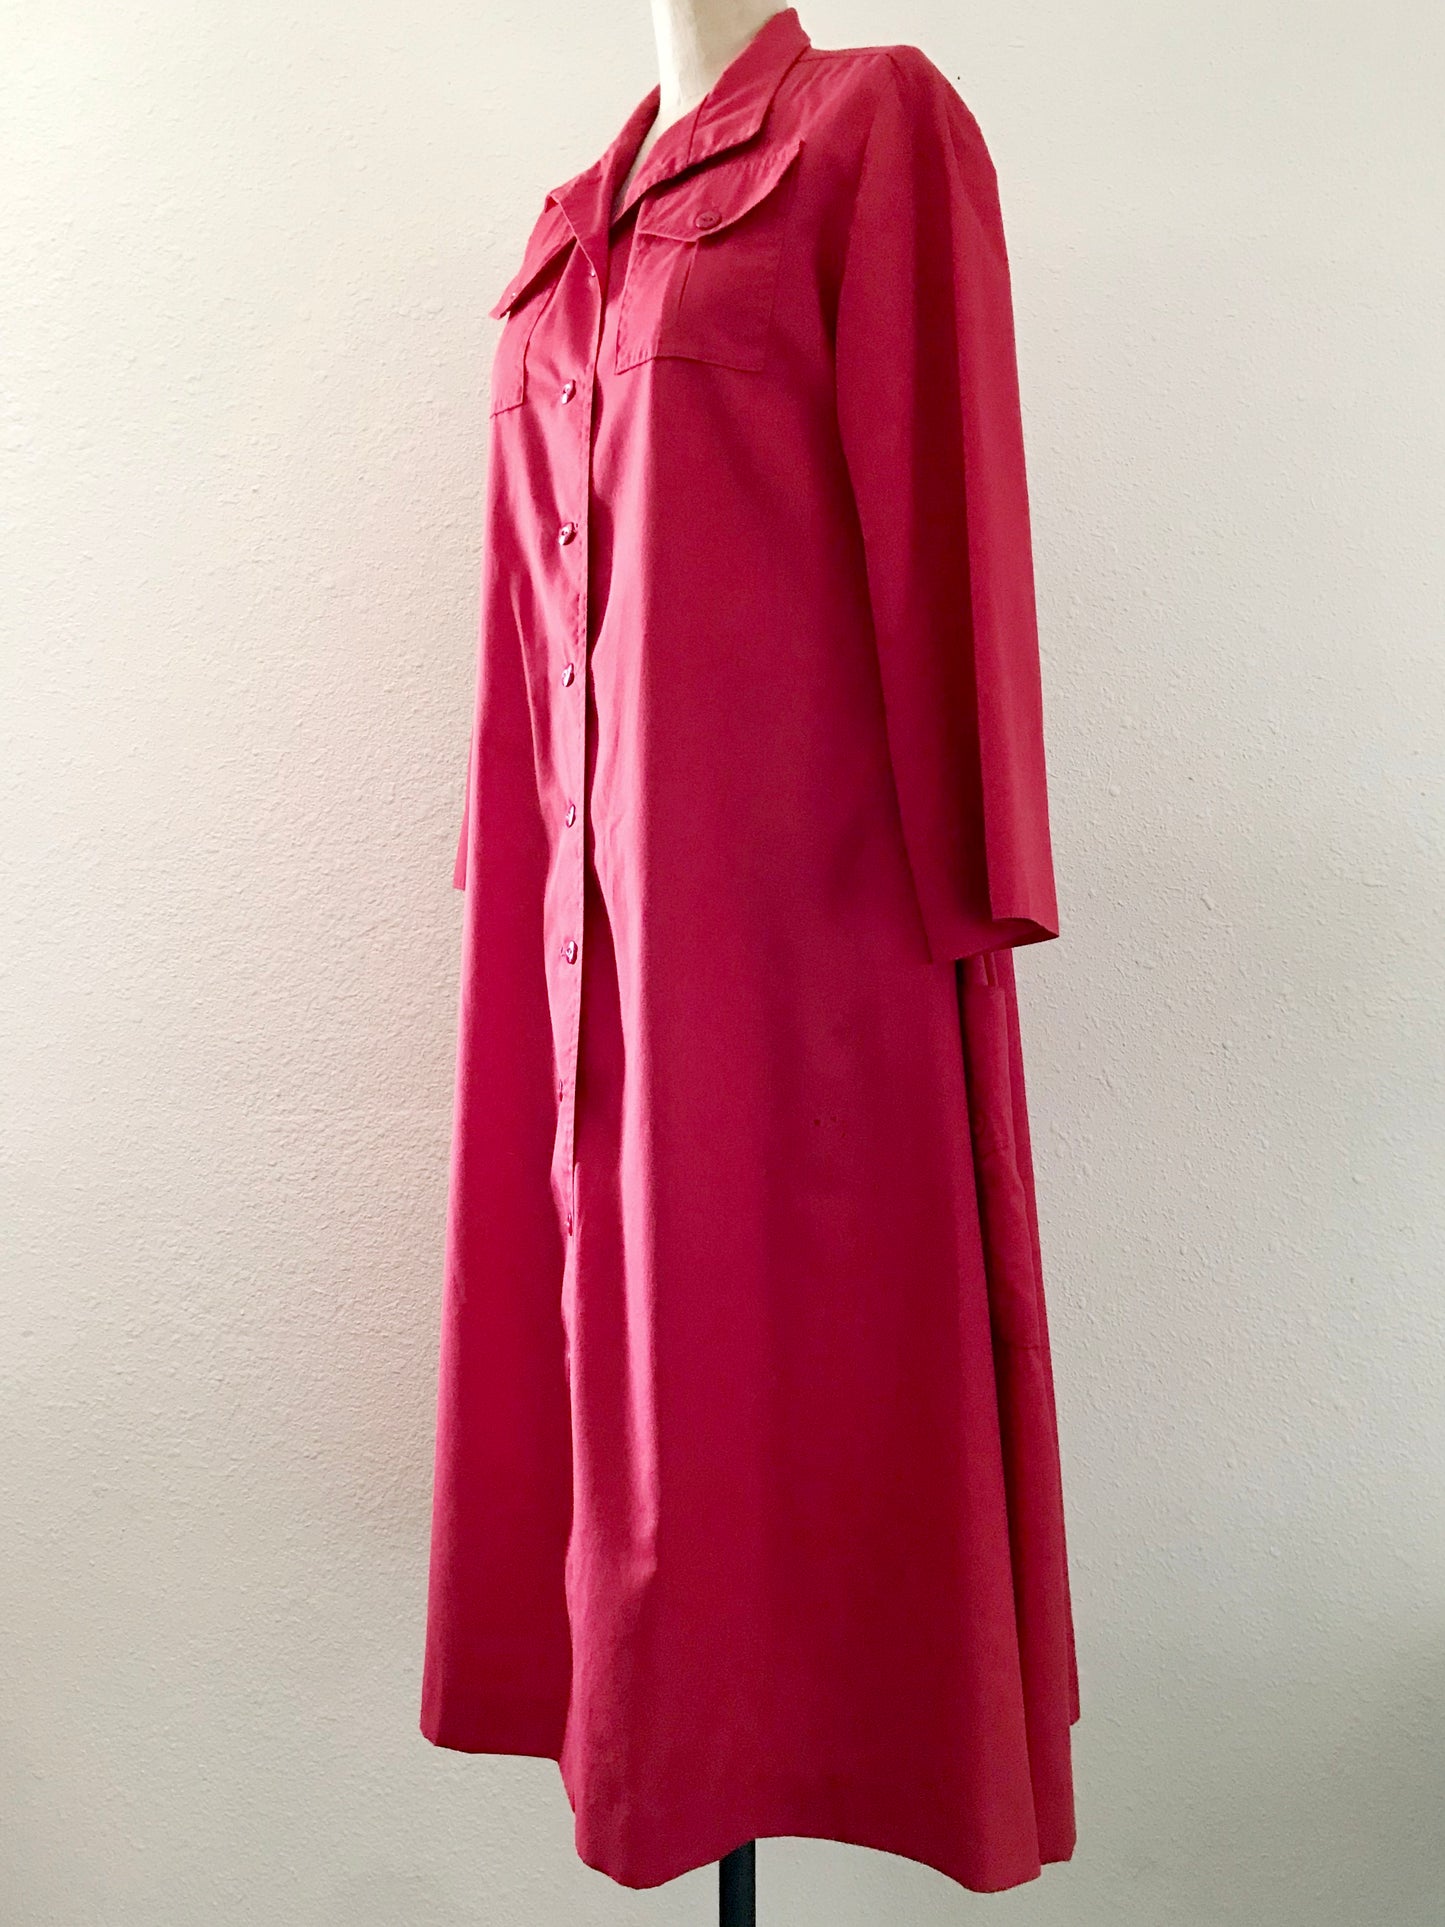 Vintage Serbin 1960s Red A Line Button Front 3/4 Sleeve Midi Dress